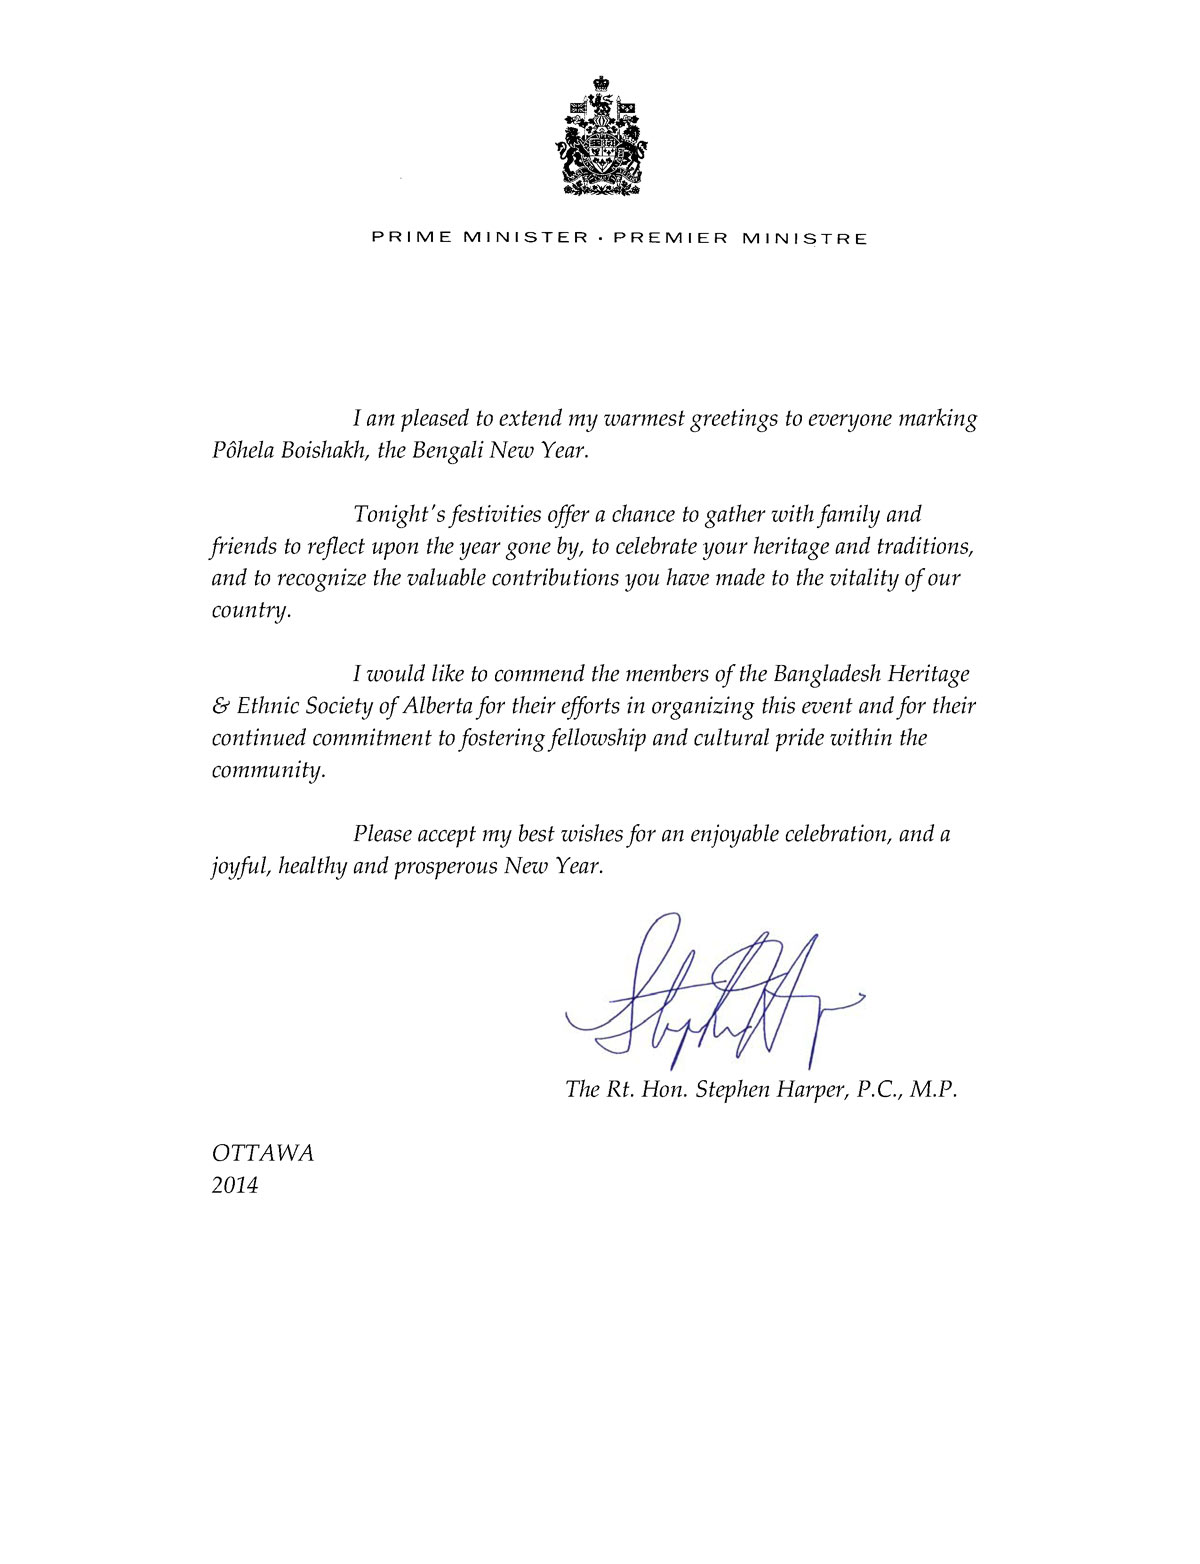 Message from the Prime Minister of Canada, The Rt. Hon. Stephen Harper